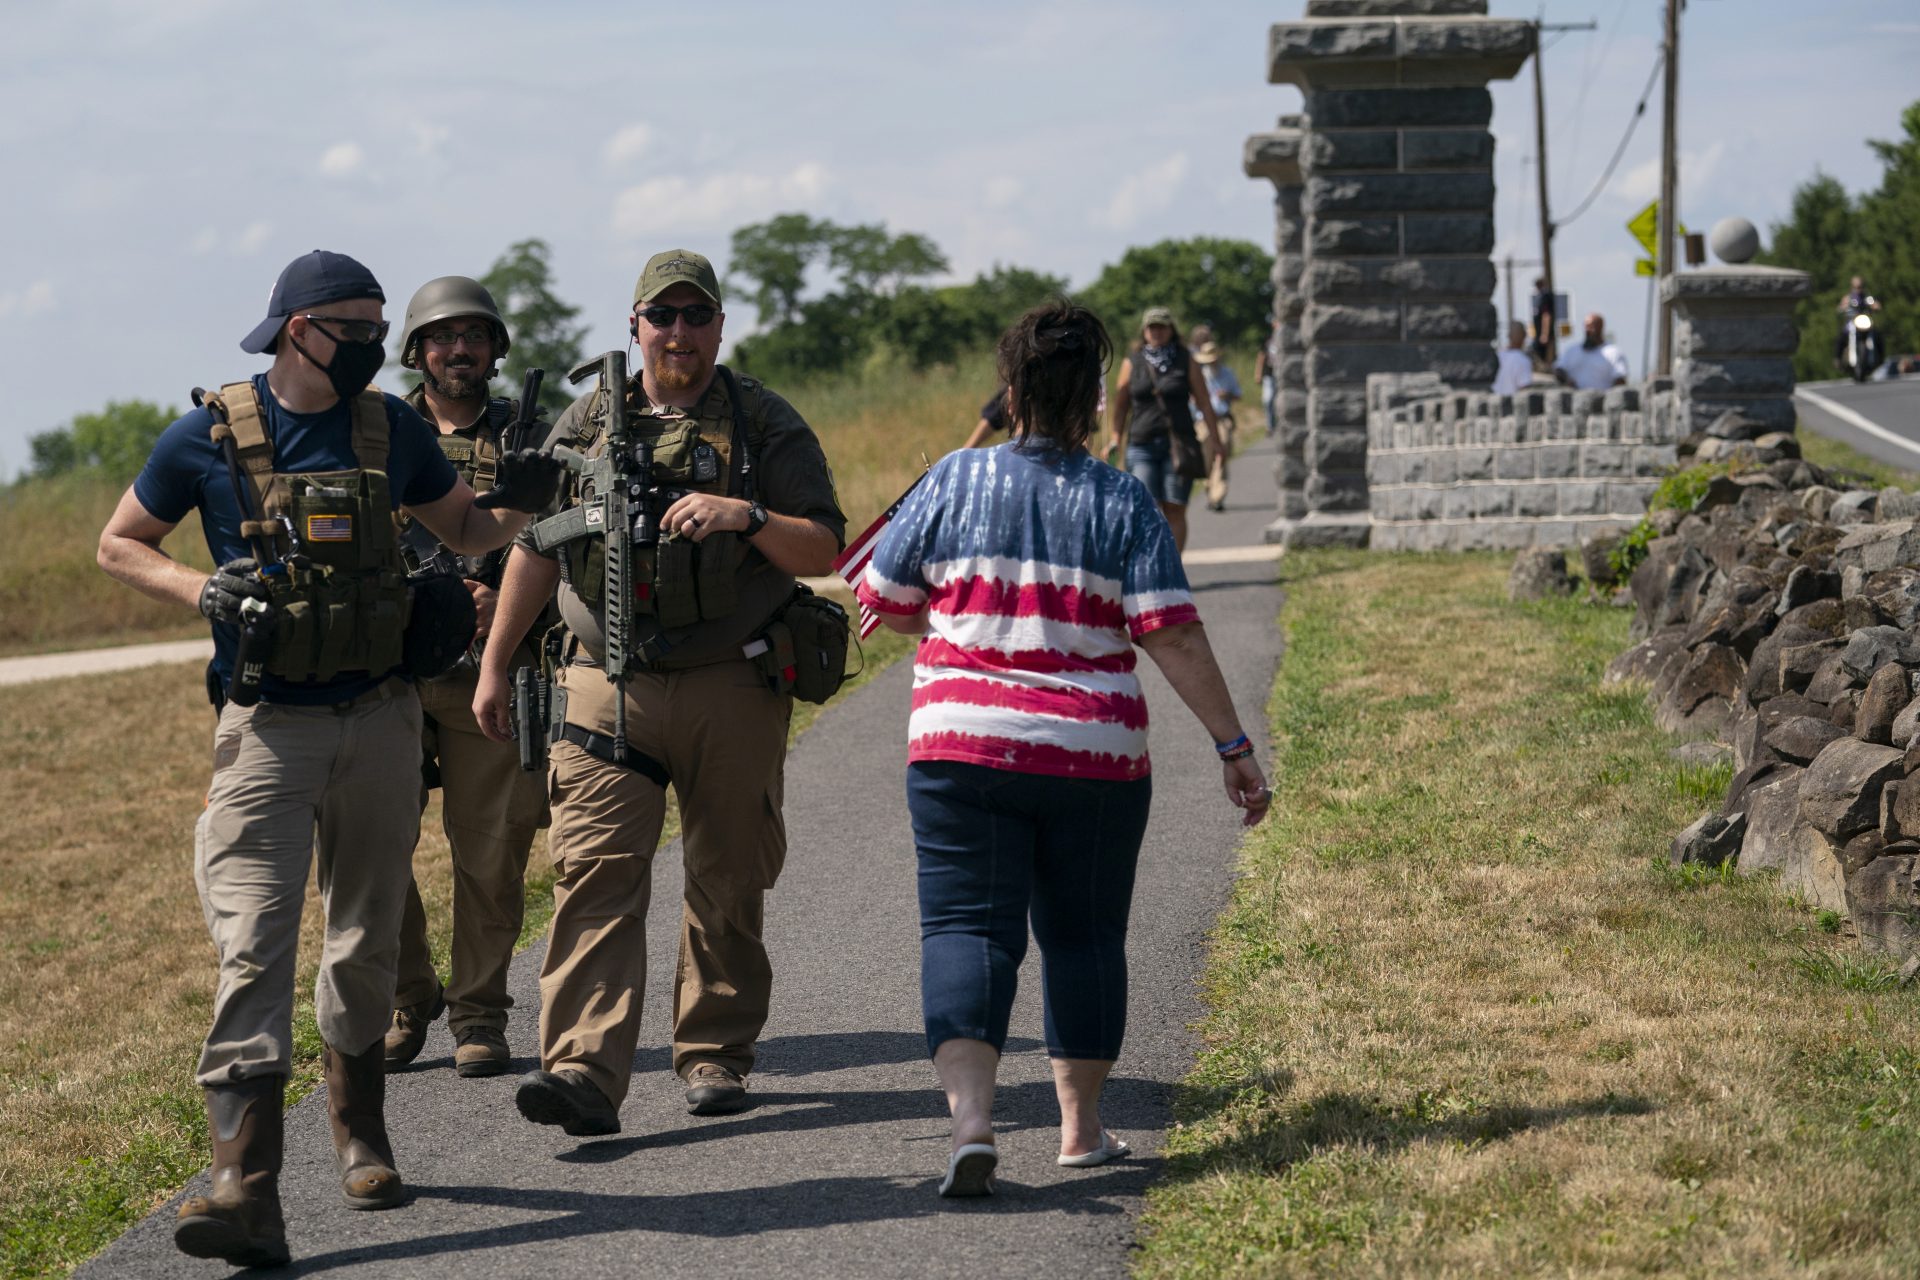 Members of a militia walk past a tourist as they patrol the area surrounding the Gettysburg National Cemetery Saturday, July 4, 2020, at Gettysburg National Military Park, in Gettysburg, Pa.